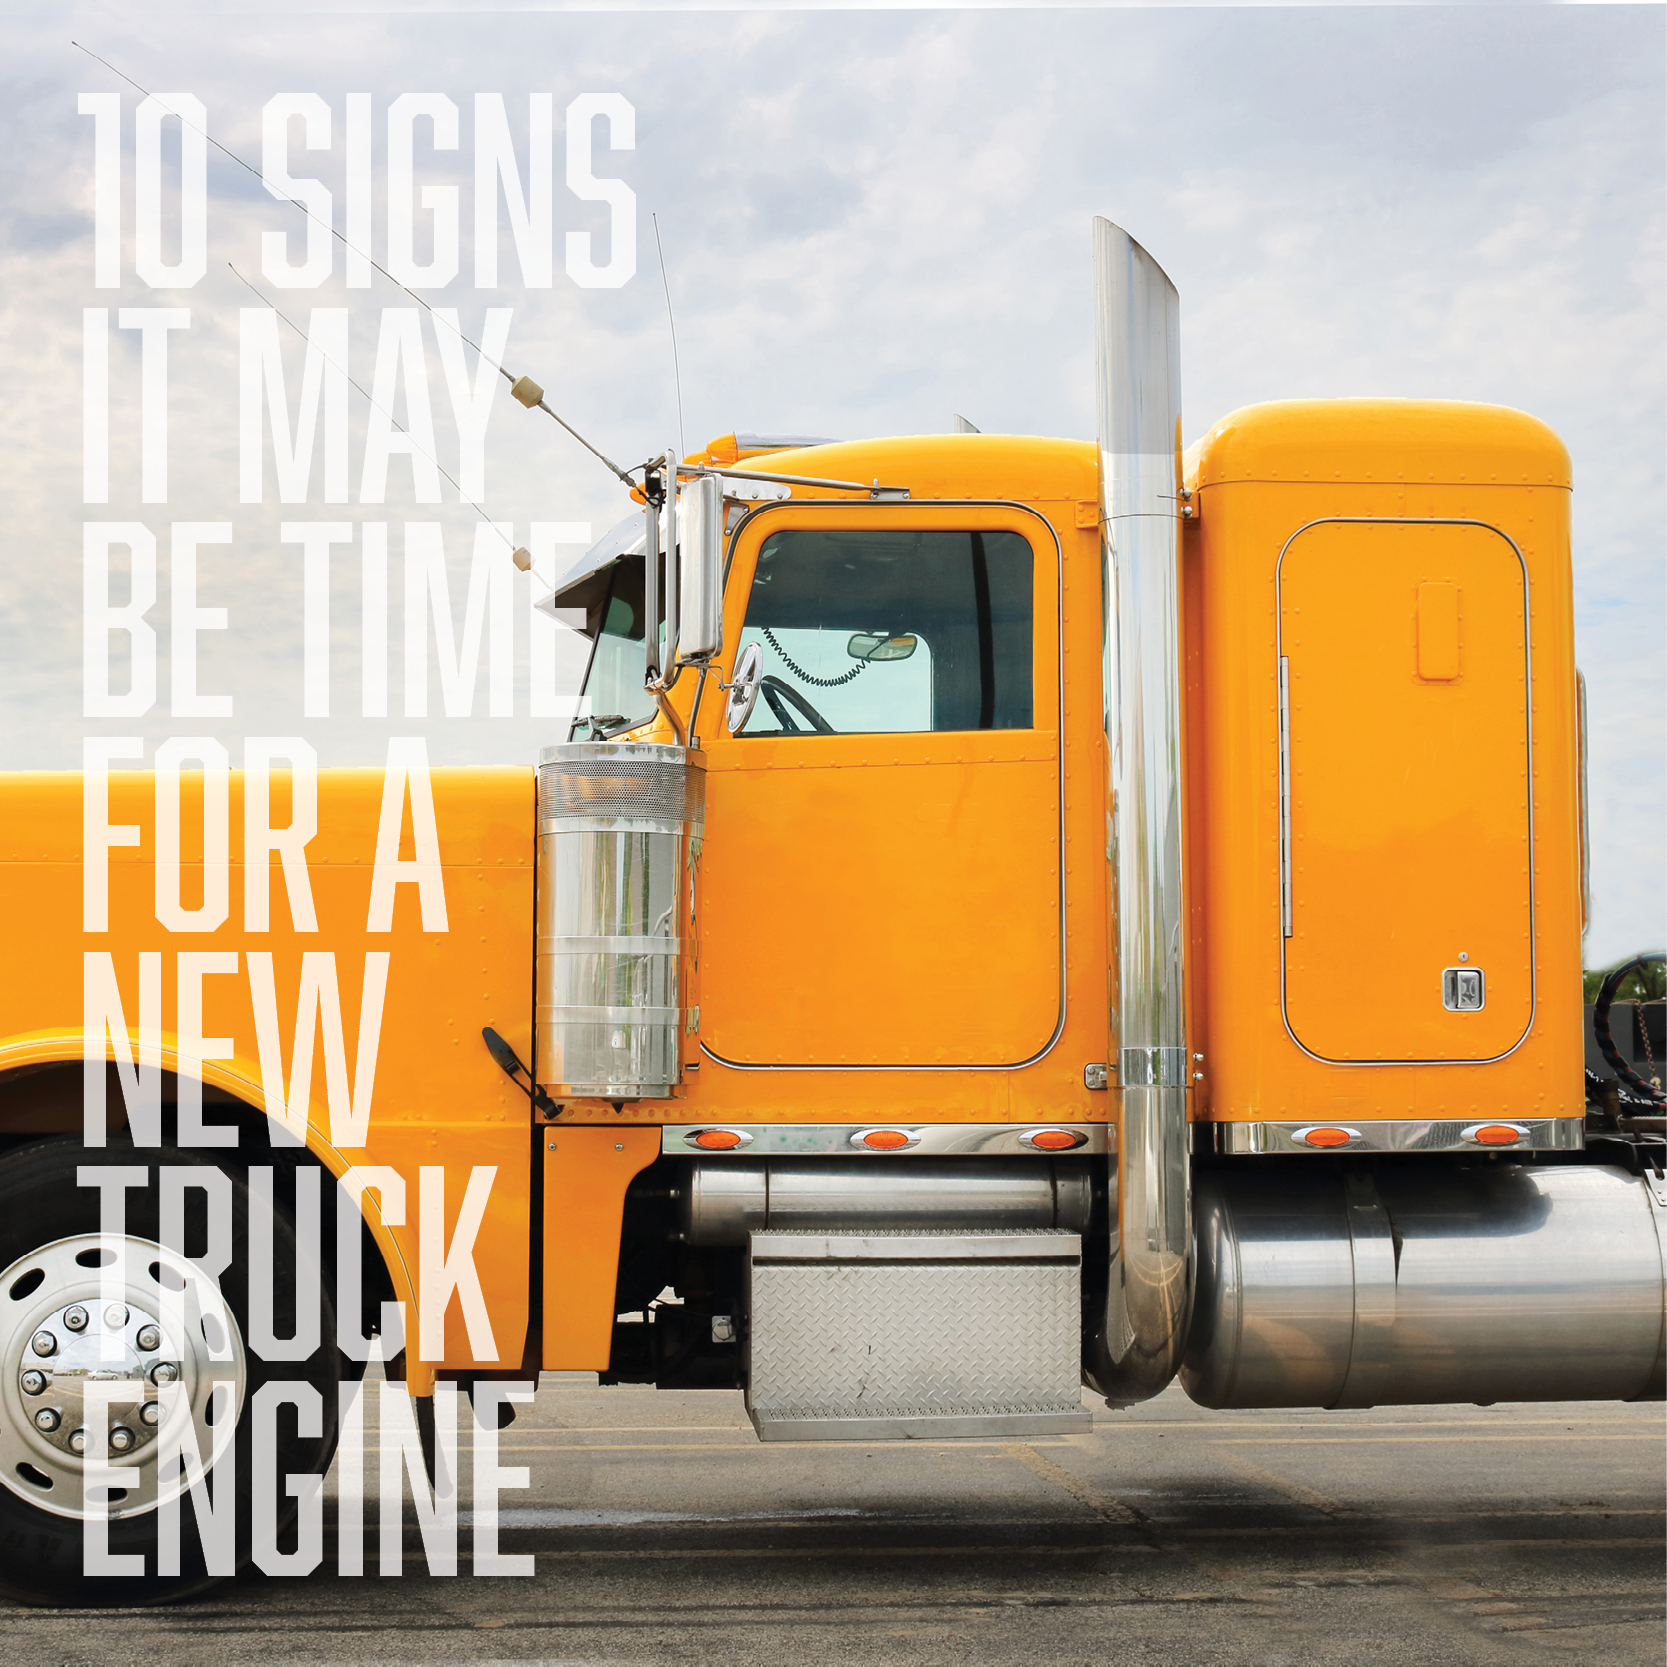 10 Signs It May Be Time for a New Truck Engine